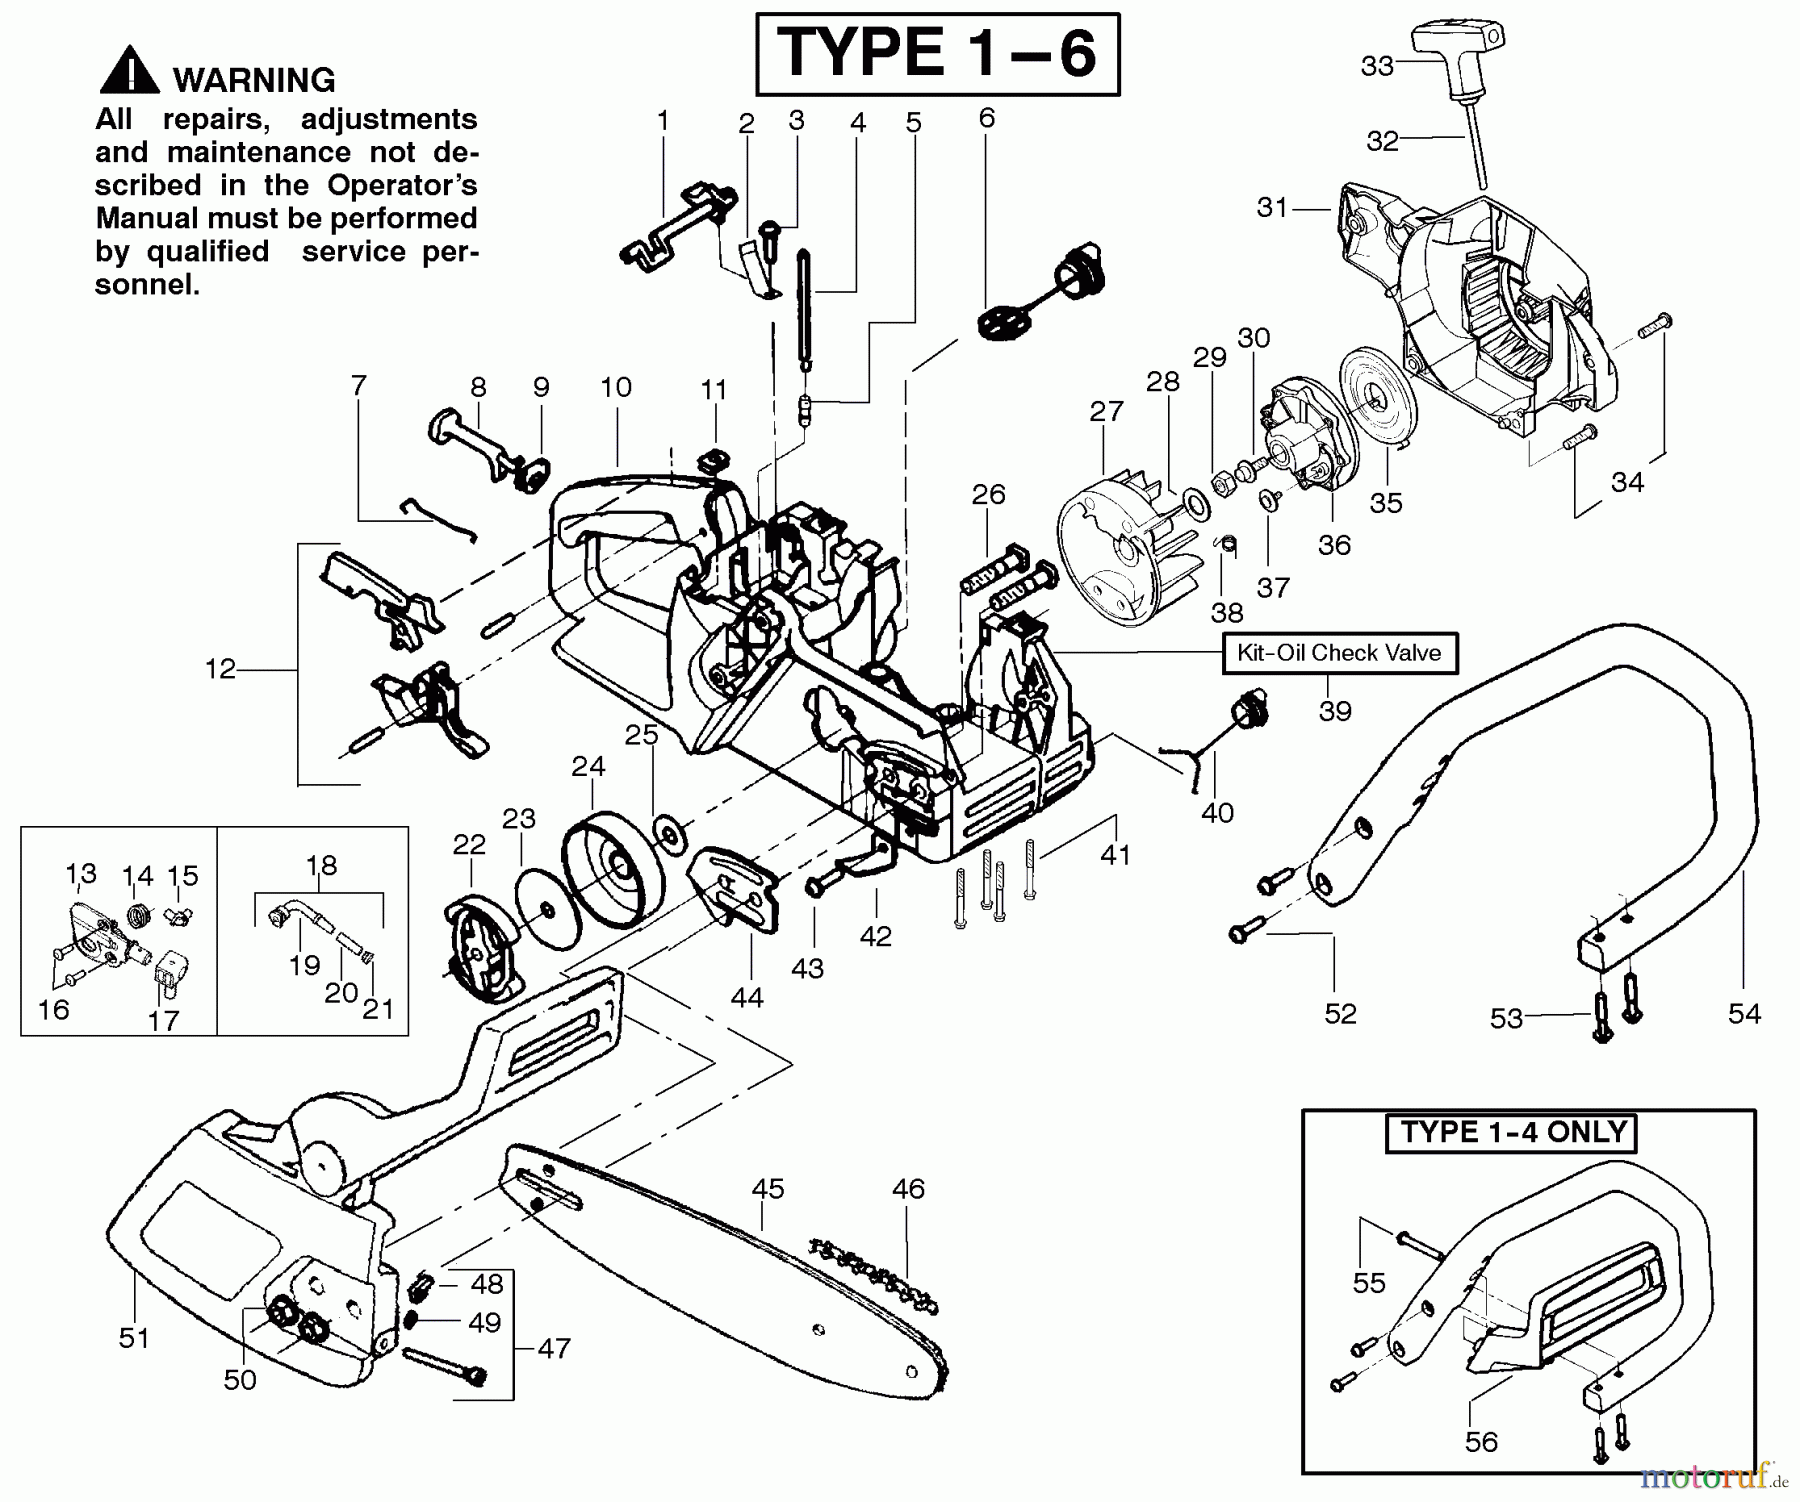  Poulan / Weed Eater Motorsägen 2175 (Type 4) - Poulan Wildthing Chainsaw Handle, Chassis & Bar Assembly Type 1-6